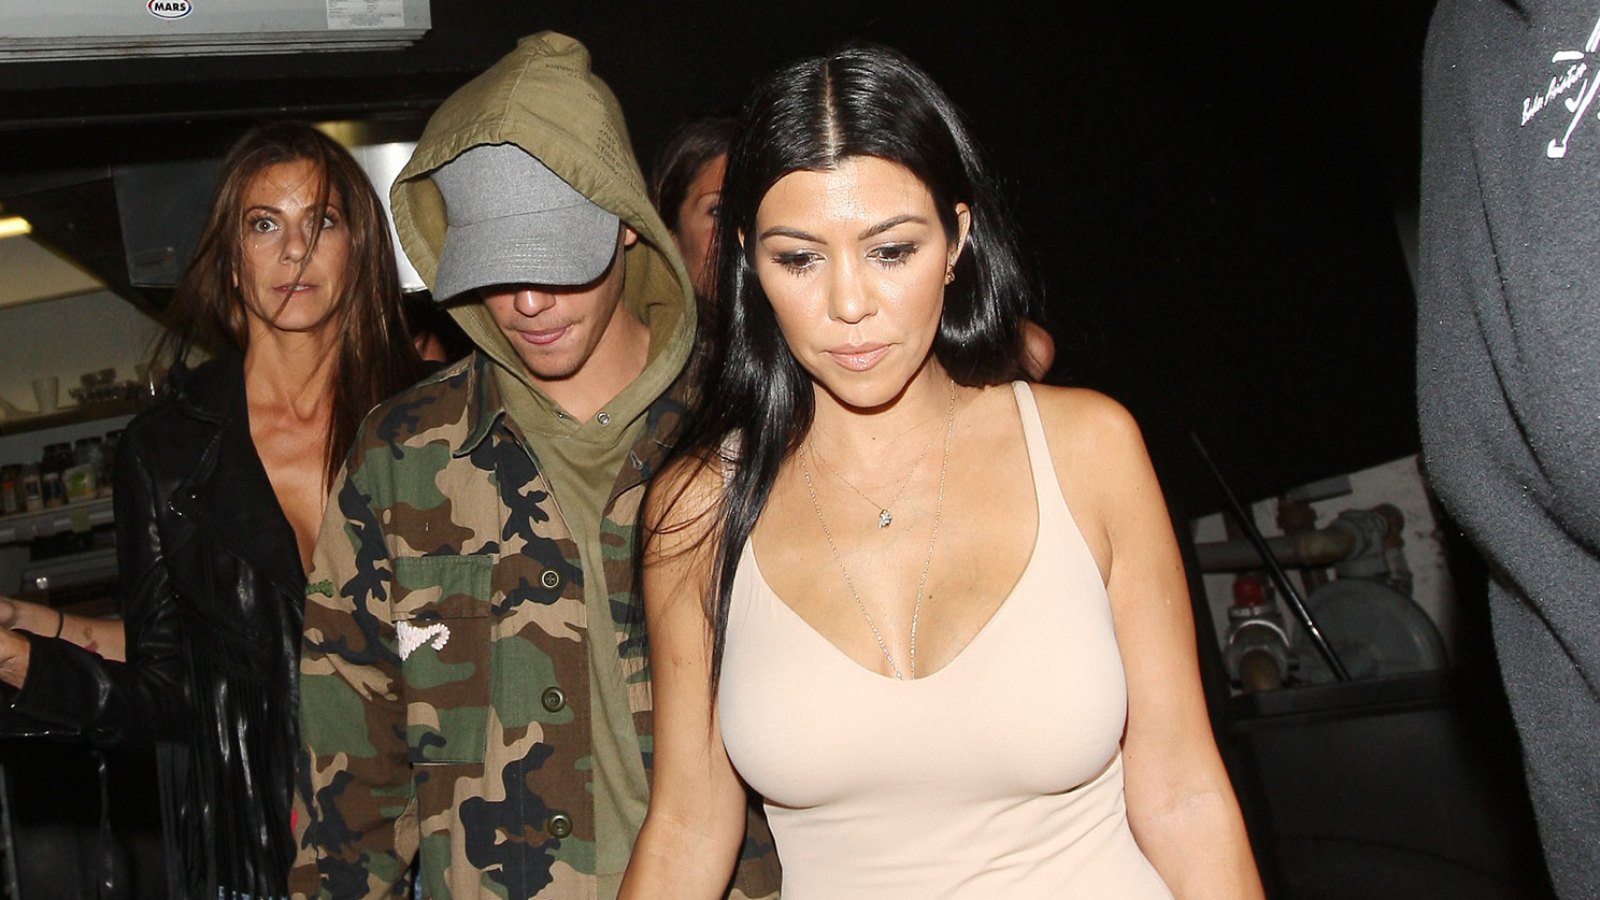 Kourtney and Justin Hangout at Club After Fling